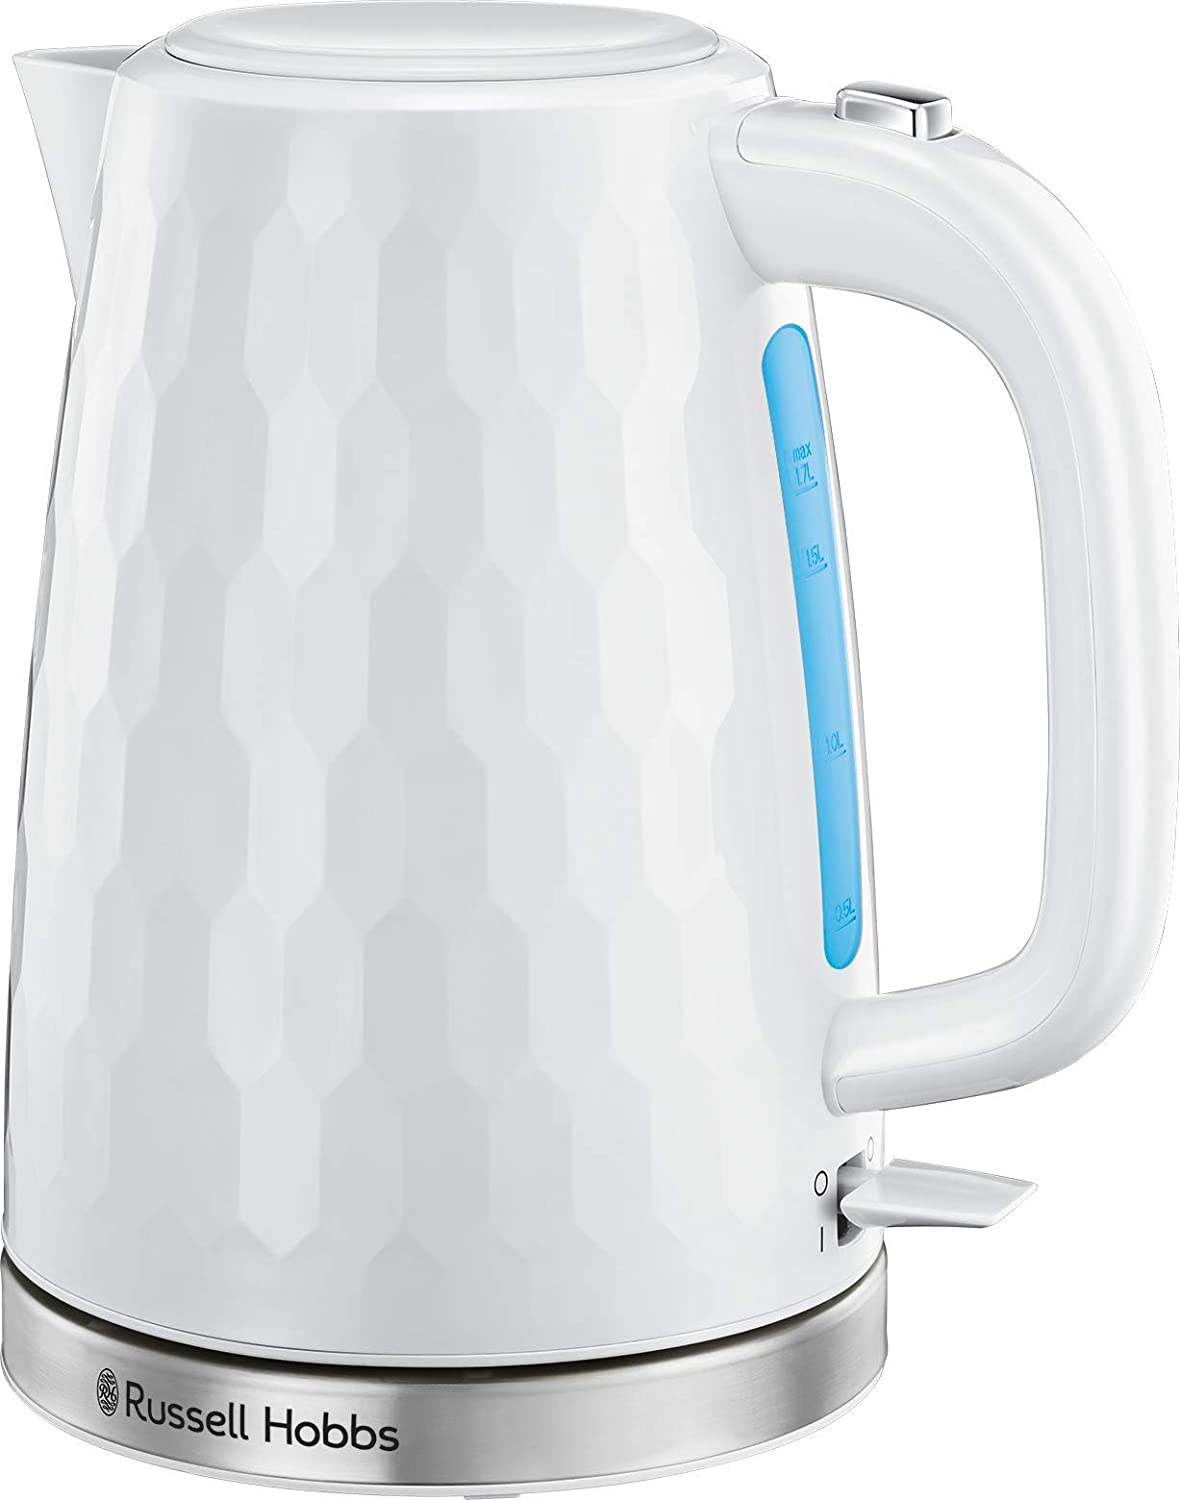 Russell Hobbs Wireless Kettle 26050 - Modern Honeycomb Design with Boil Dry Protection 1.7 Litre 3000 W White